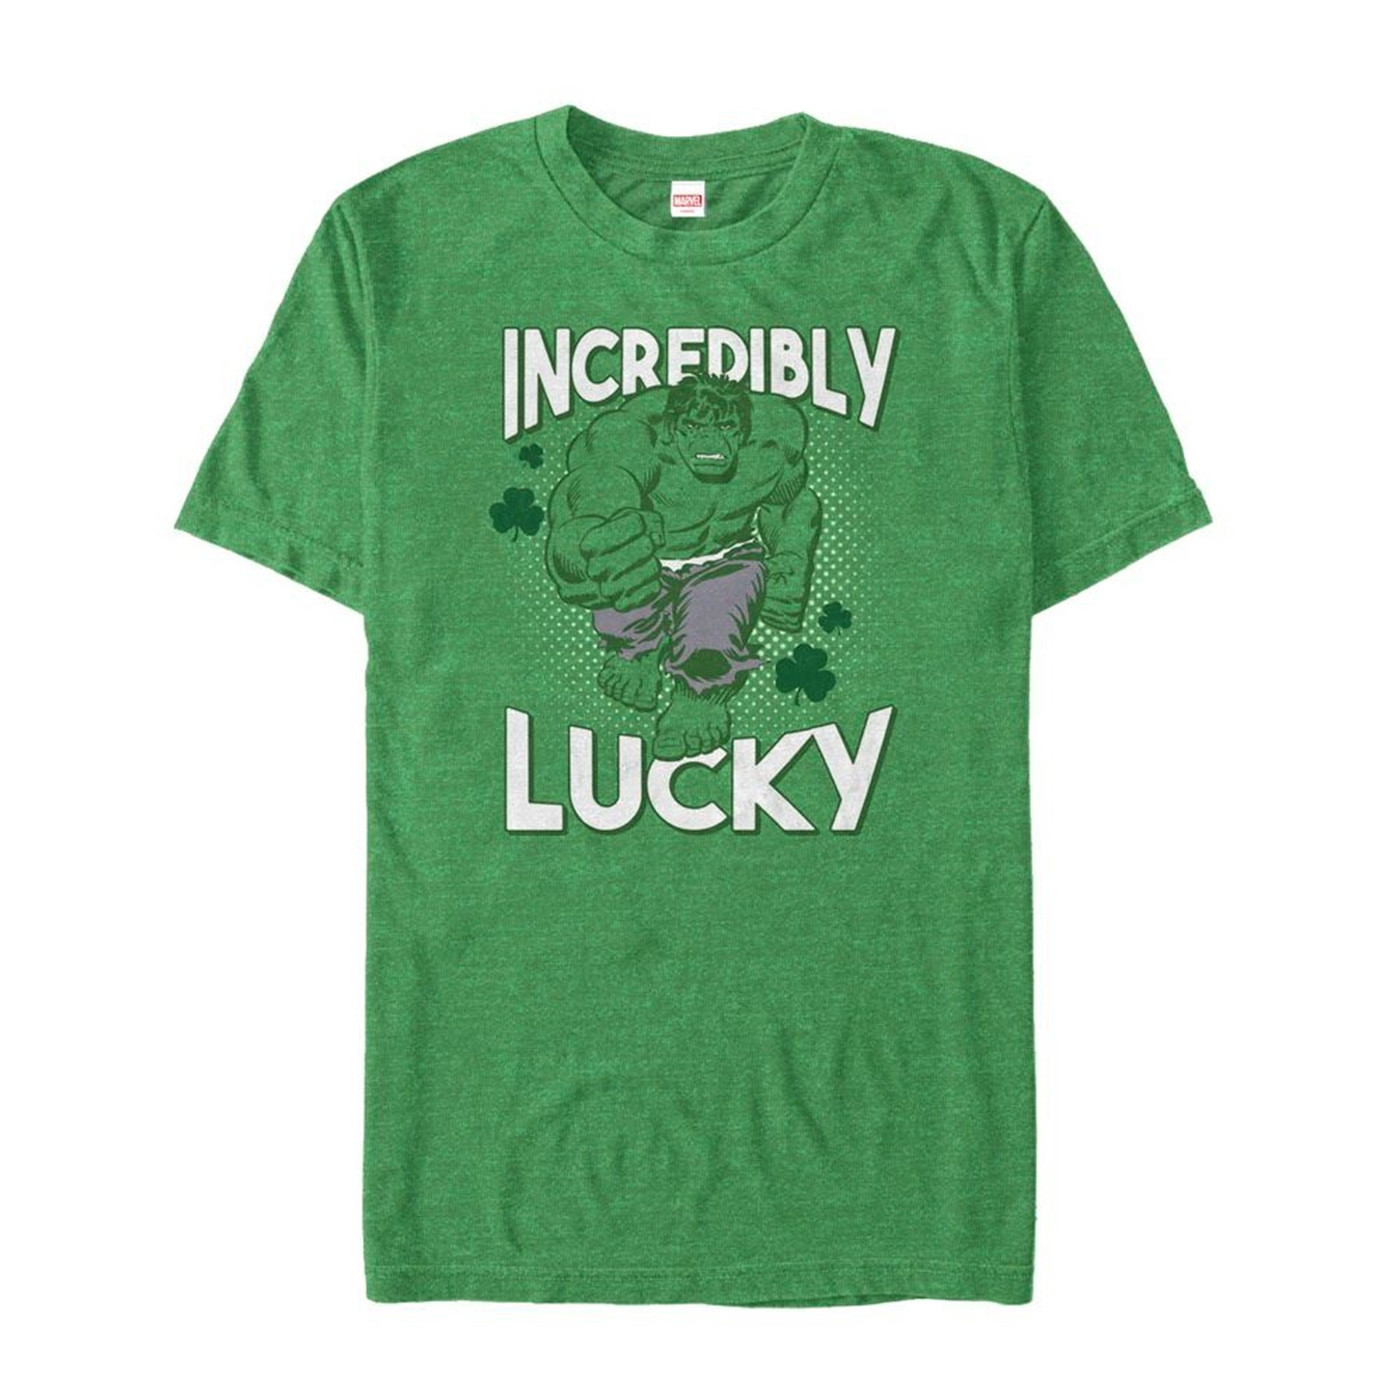 The Hulk Incredibly Lucky St Patrick's Day T-Shirt